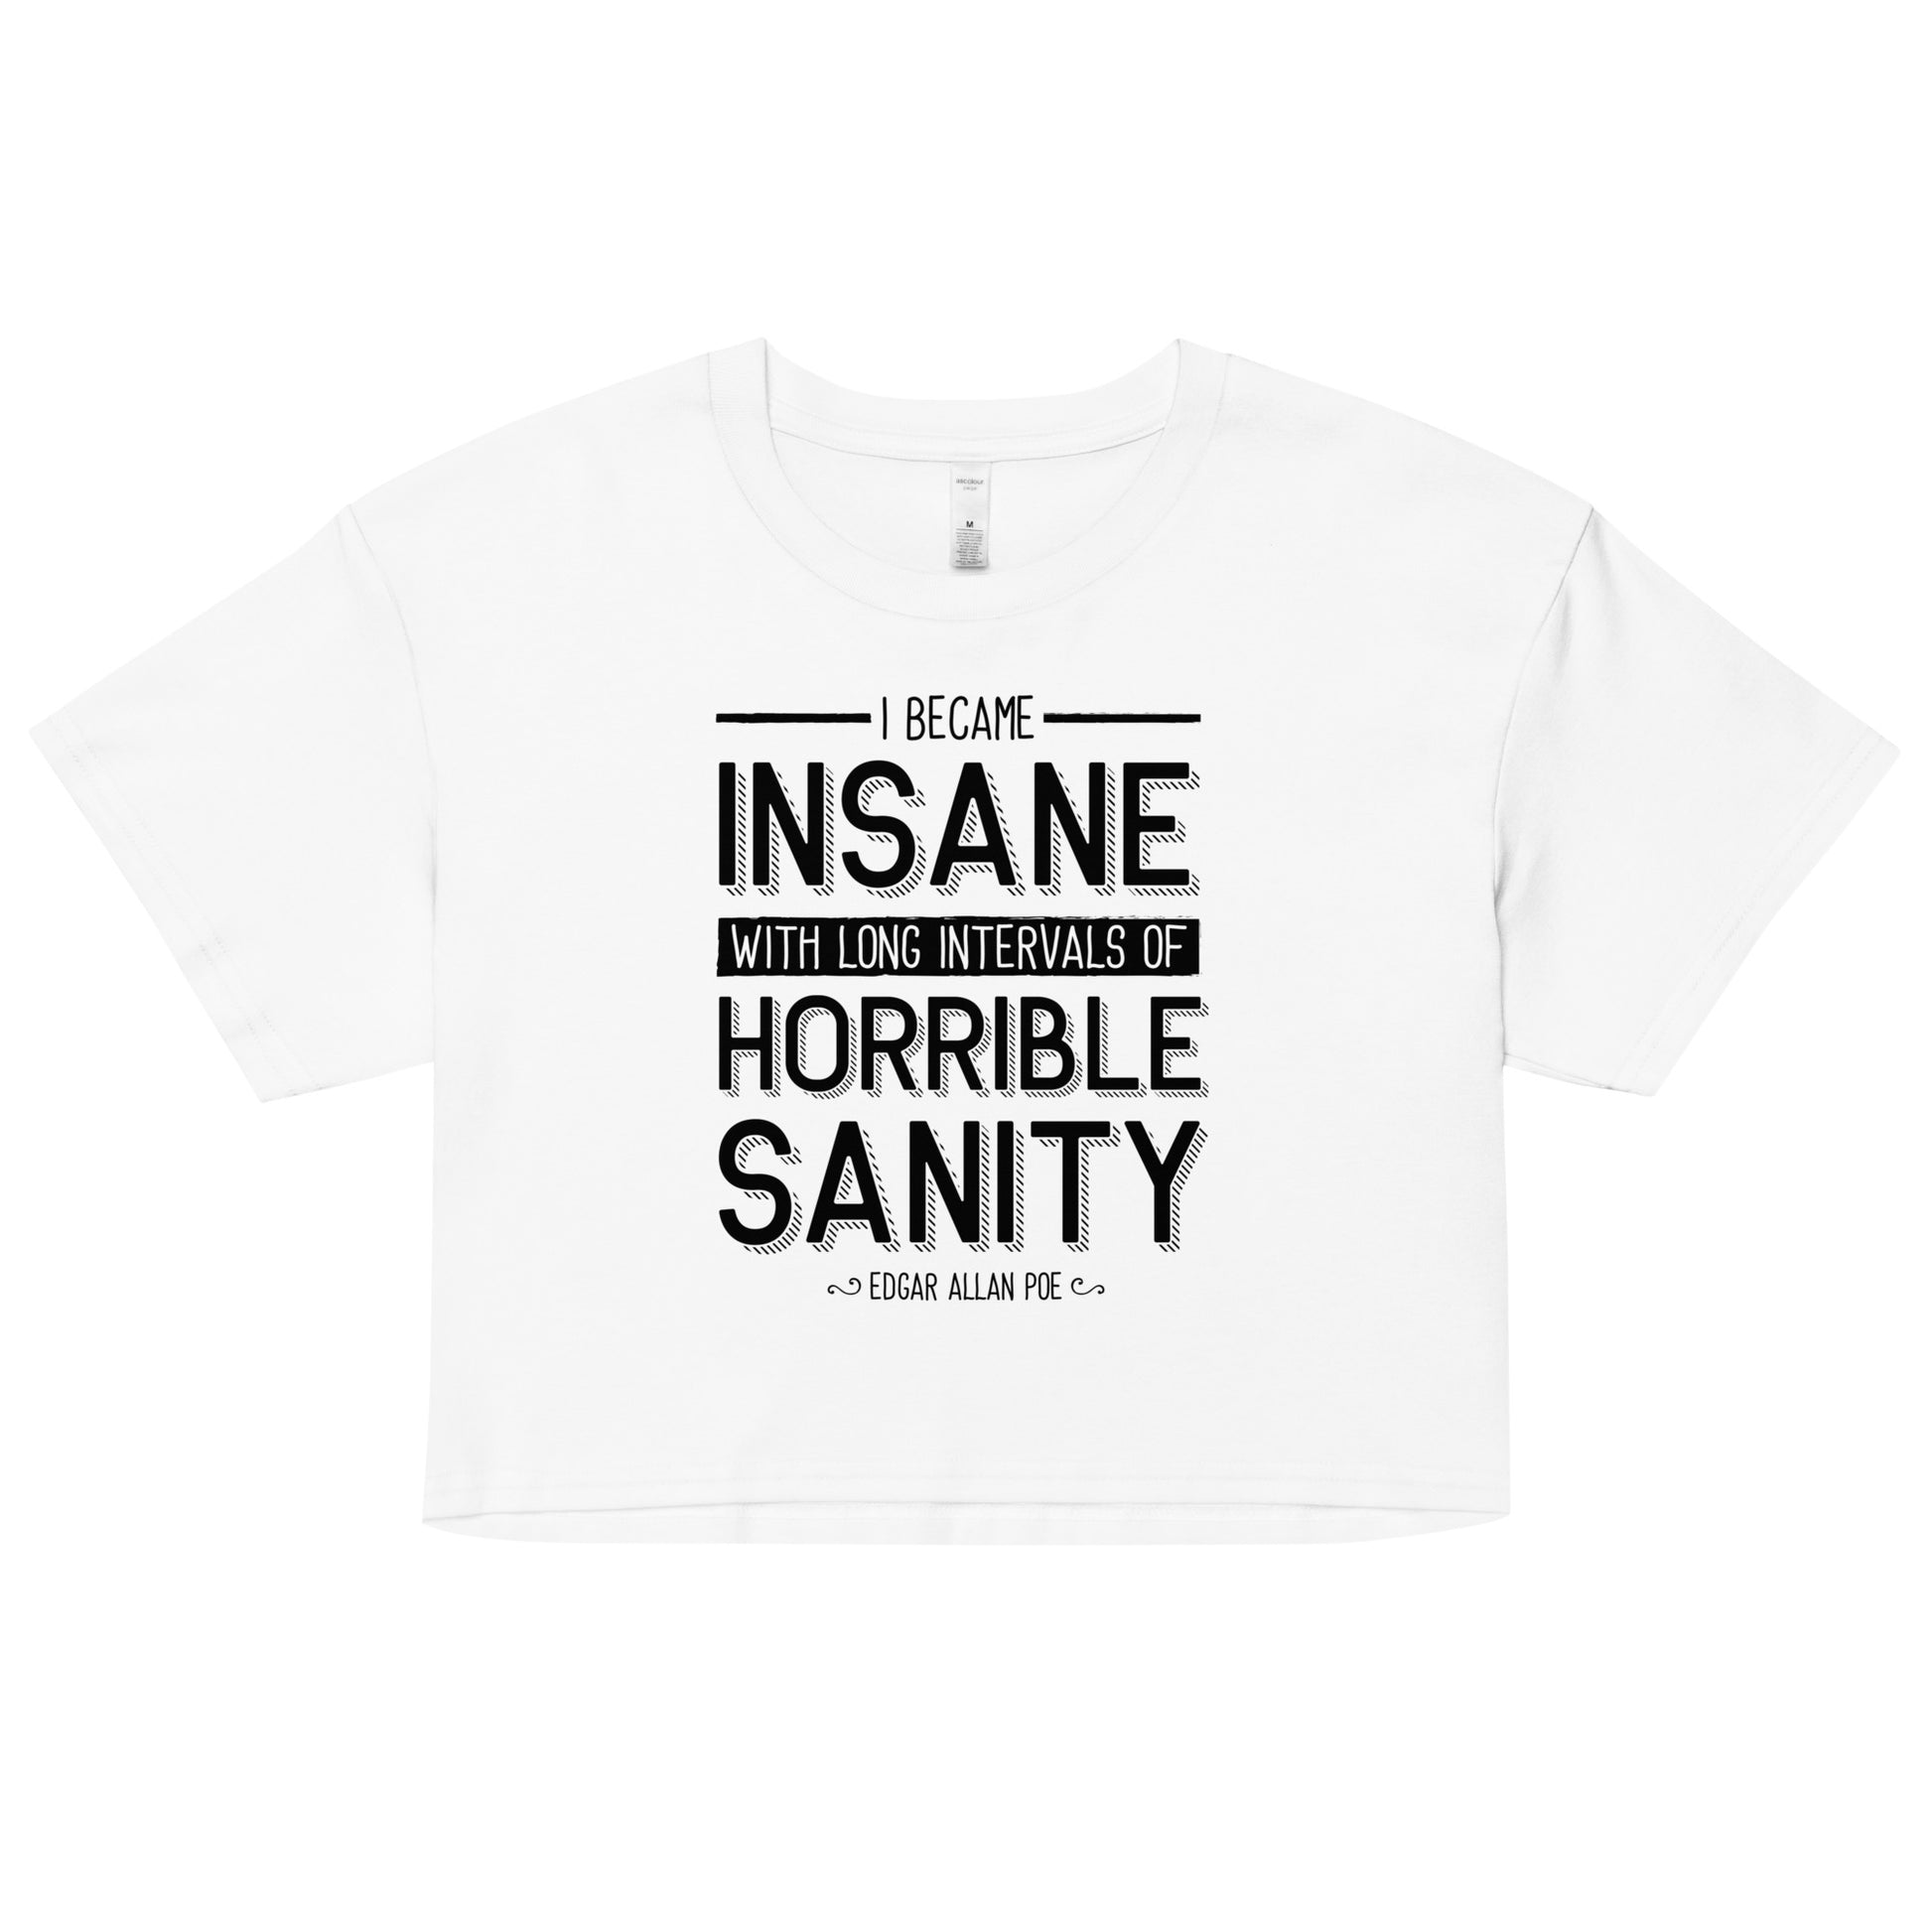 I Became Insane Edgar Allan Poe Quote -Women’s crop top - White Front